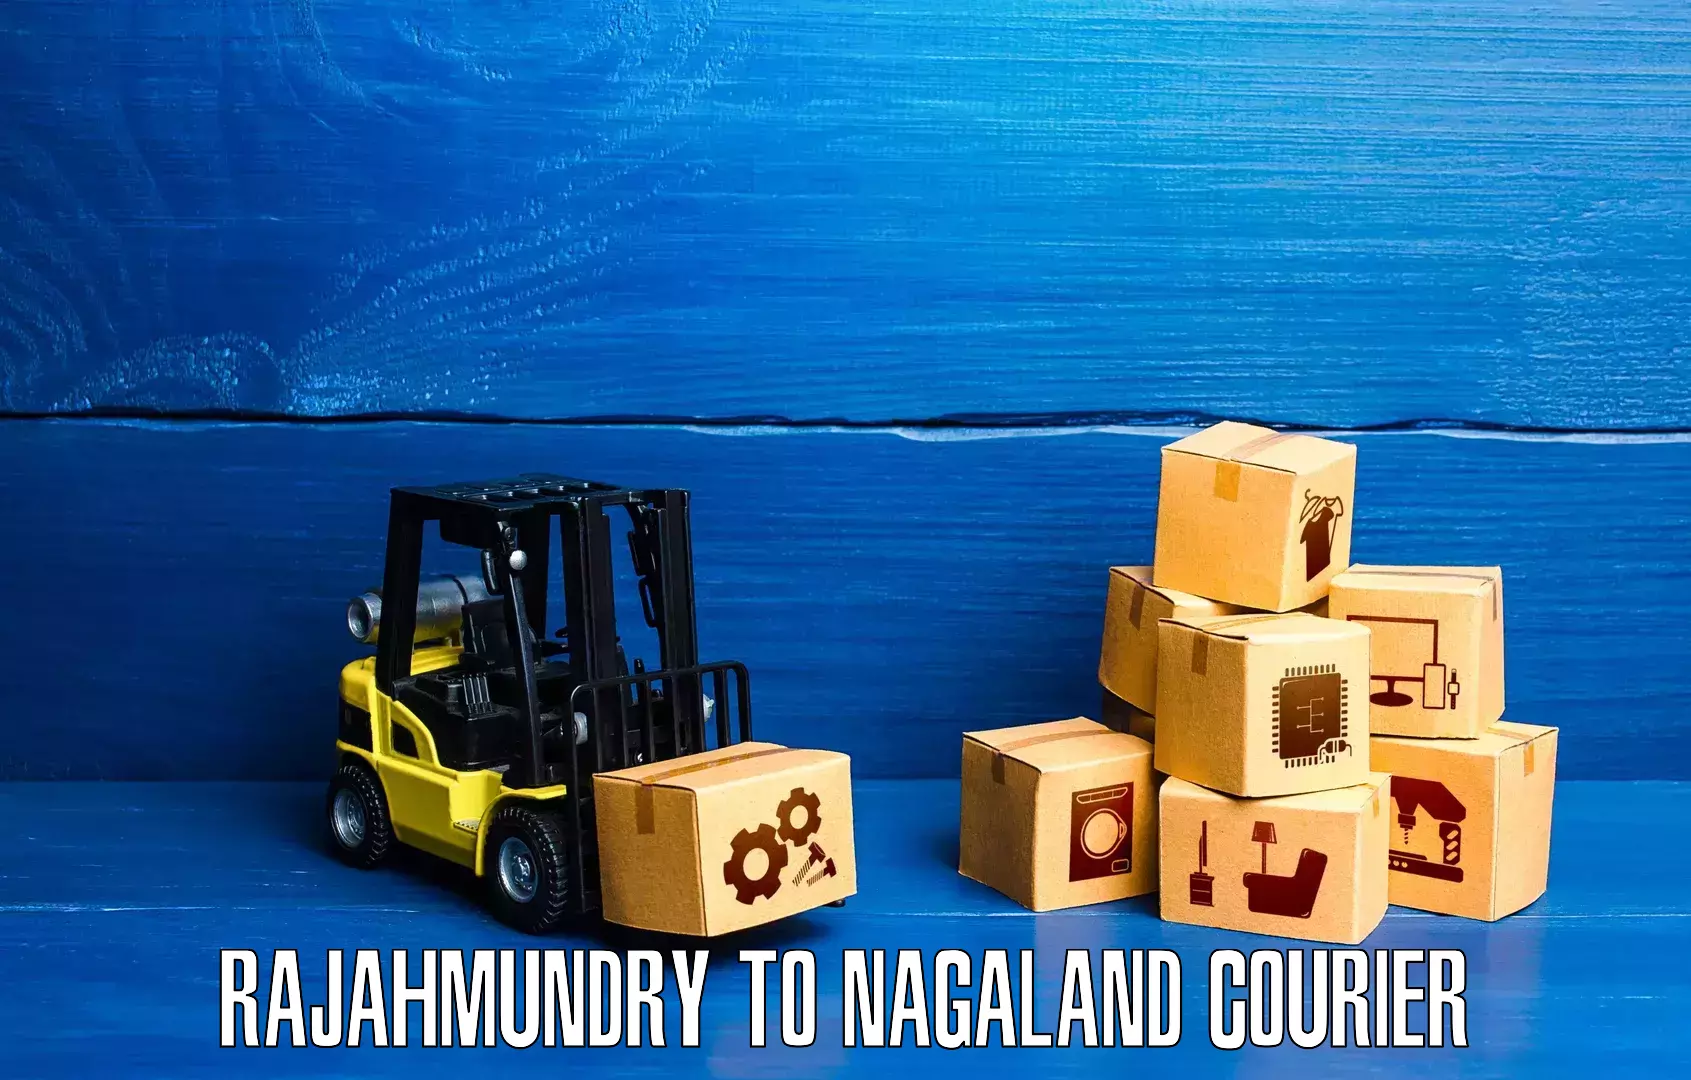 Nationwide shipping coverage Rajahmundry to Mon